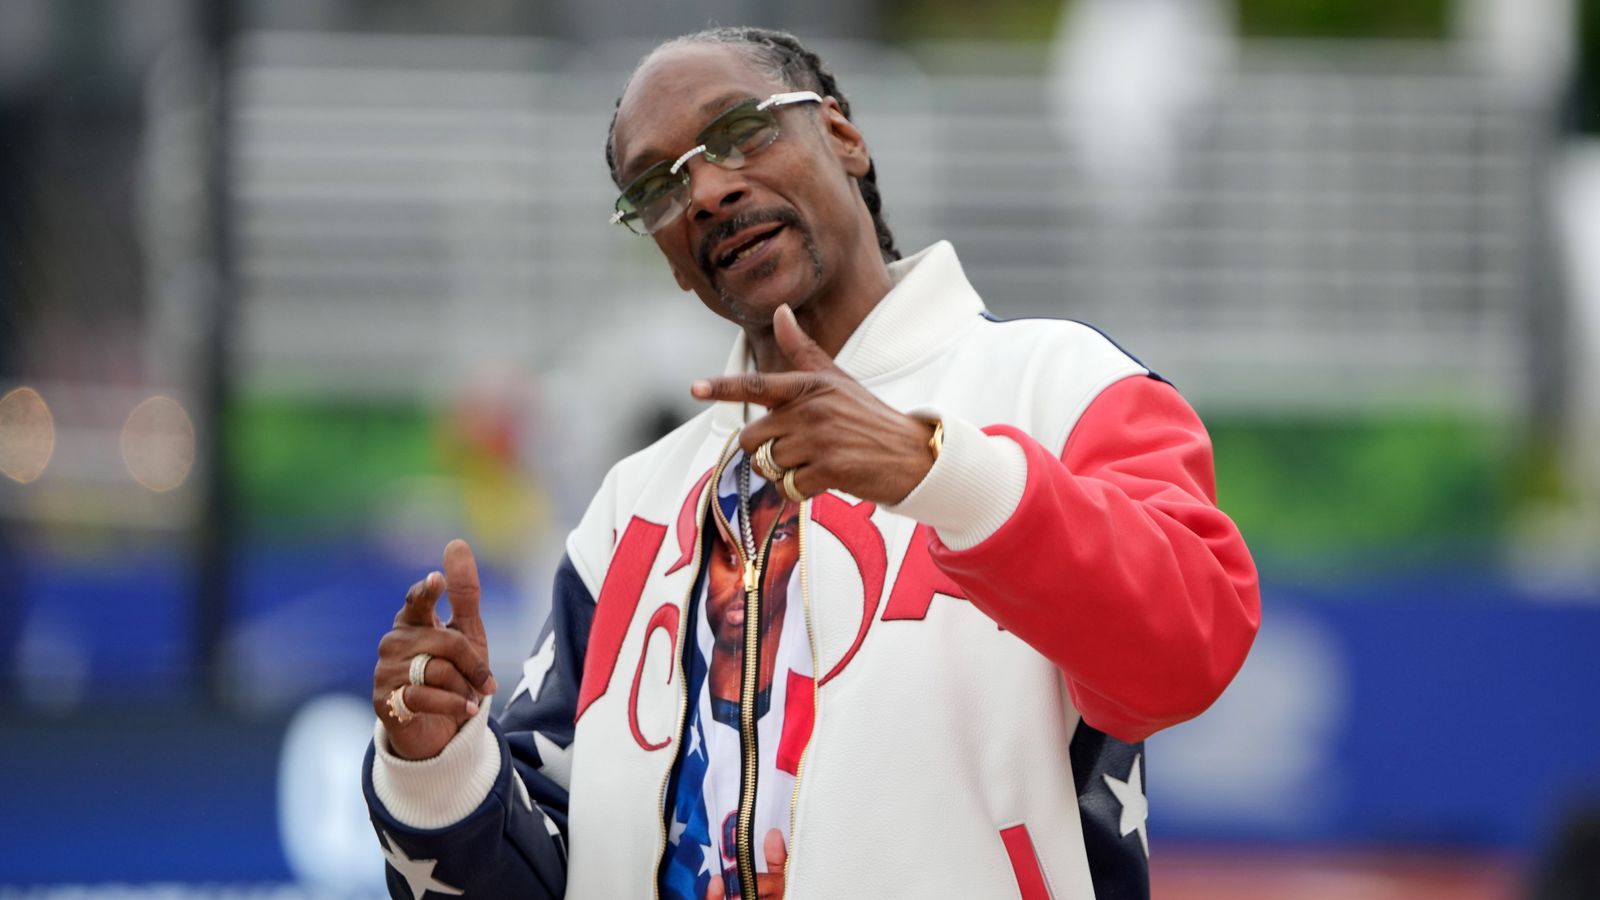 Snoop Dogg to carry Olympic torch in its final stages in Paris | World News